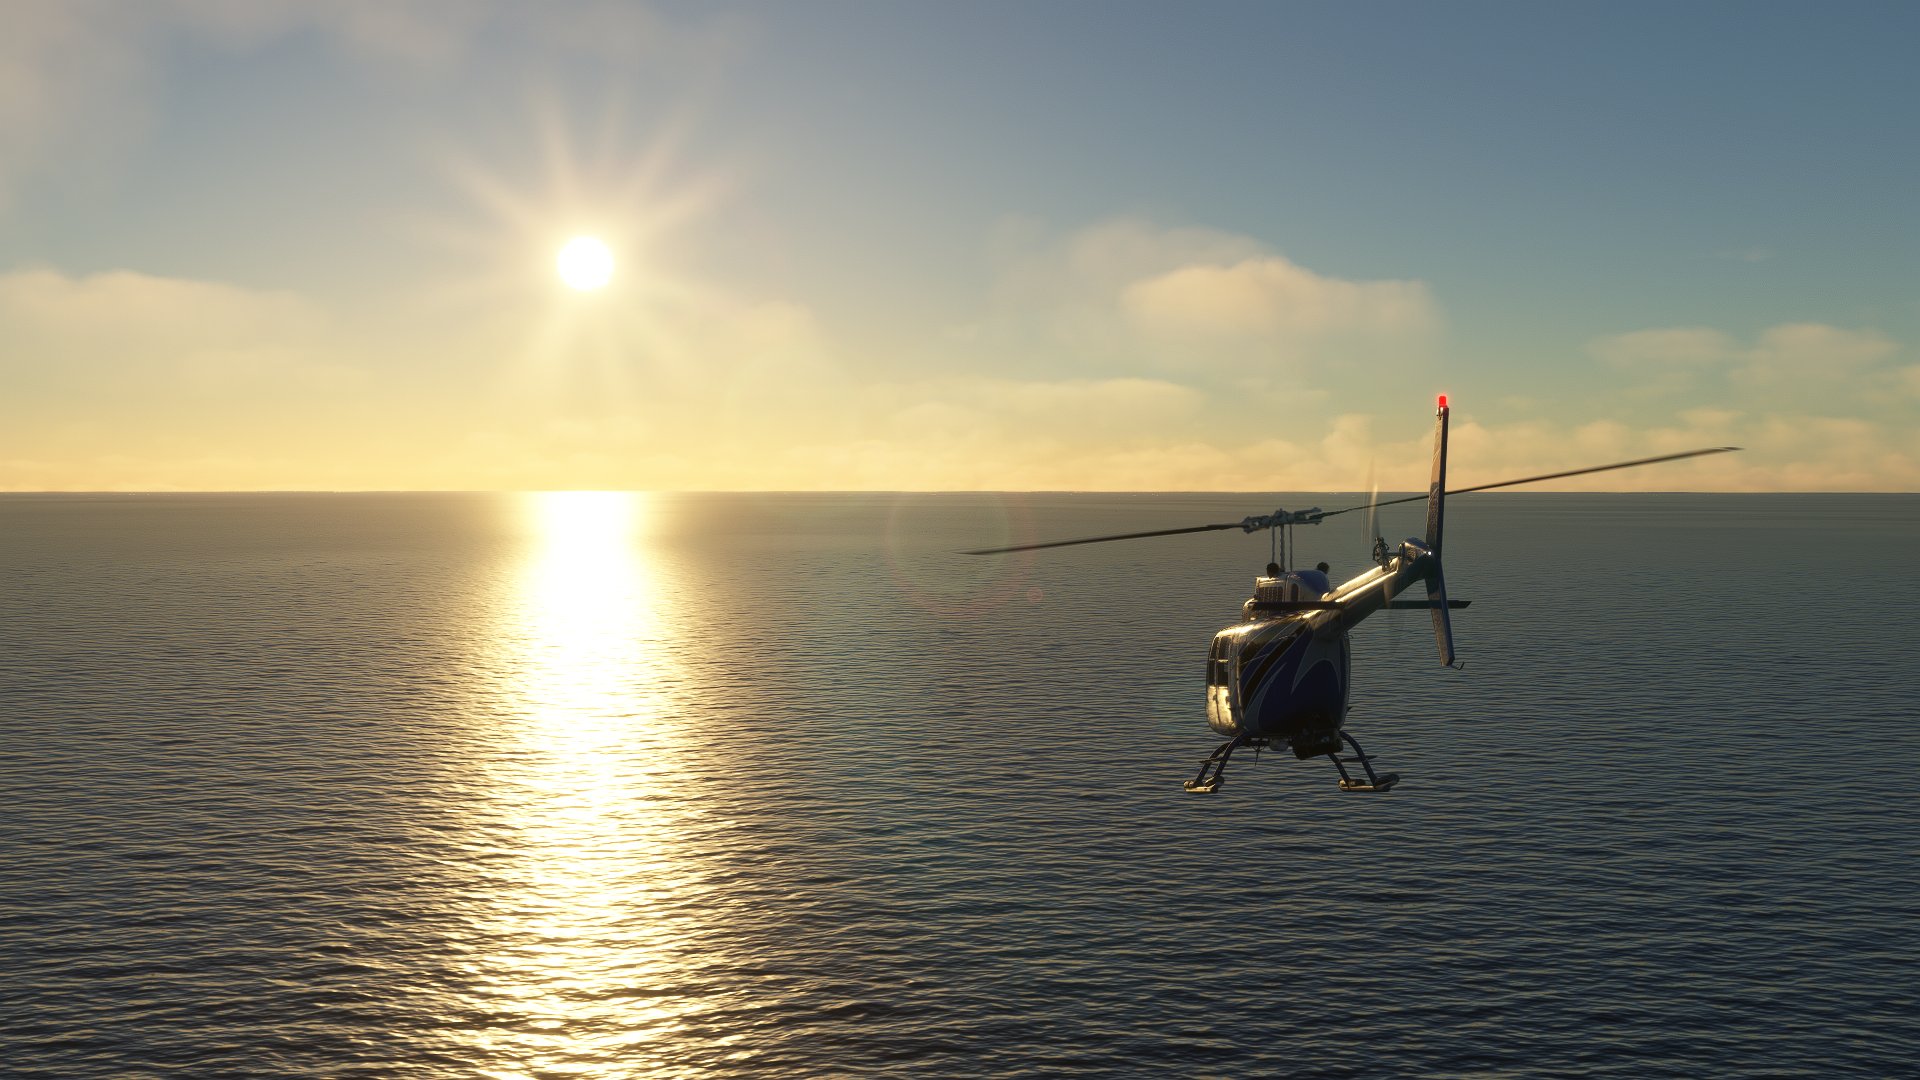 A Bell 407 helicopter flies towards the sunset over the open seas.